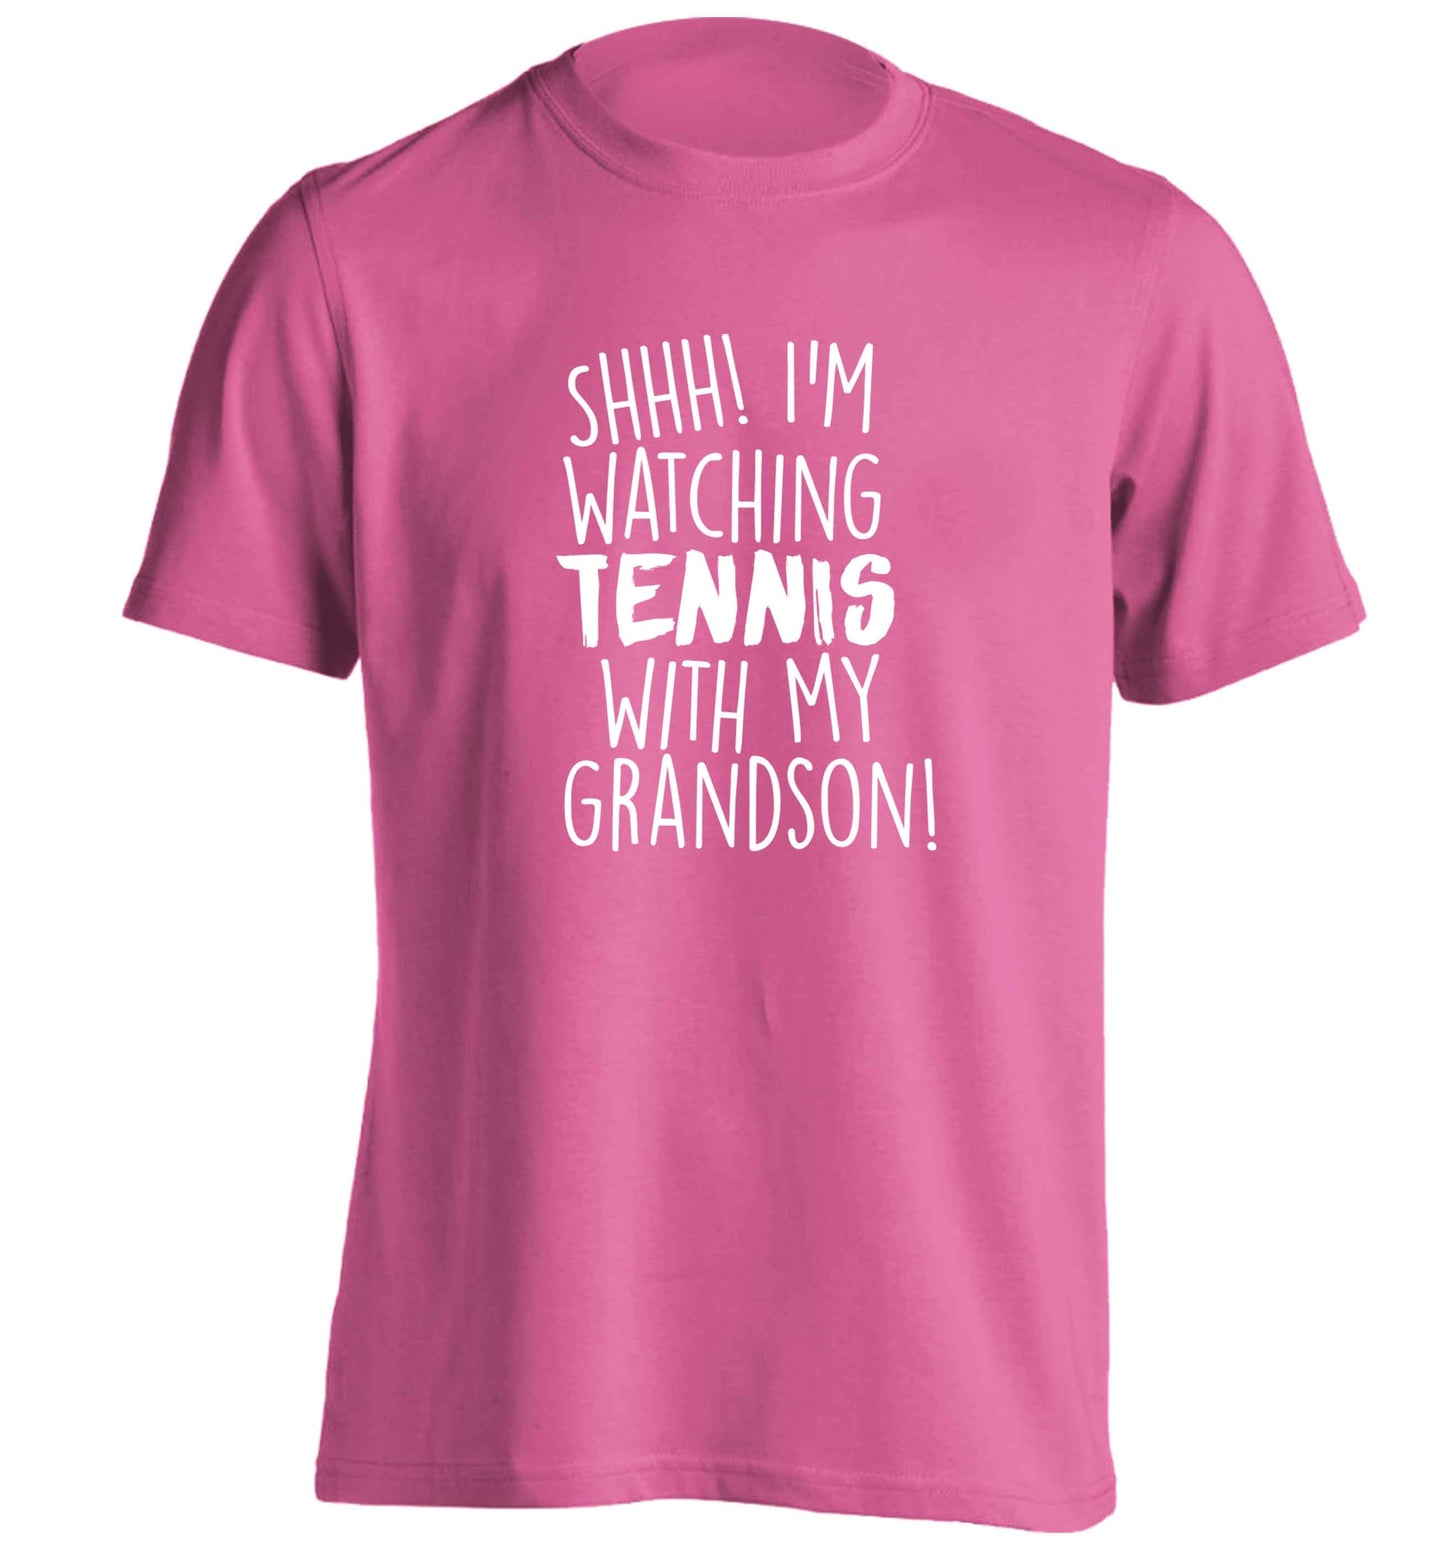 Shh! I'm watching tennis with my grandson! adults unisex pink Tshirt 2XL